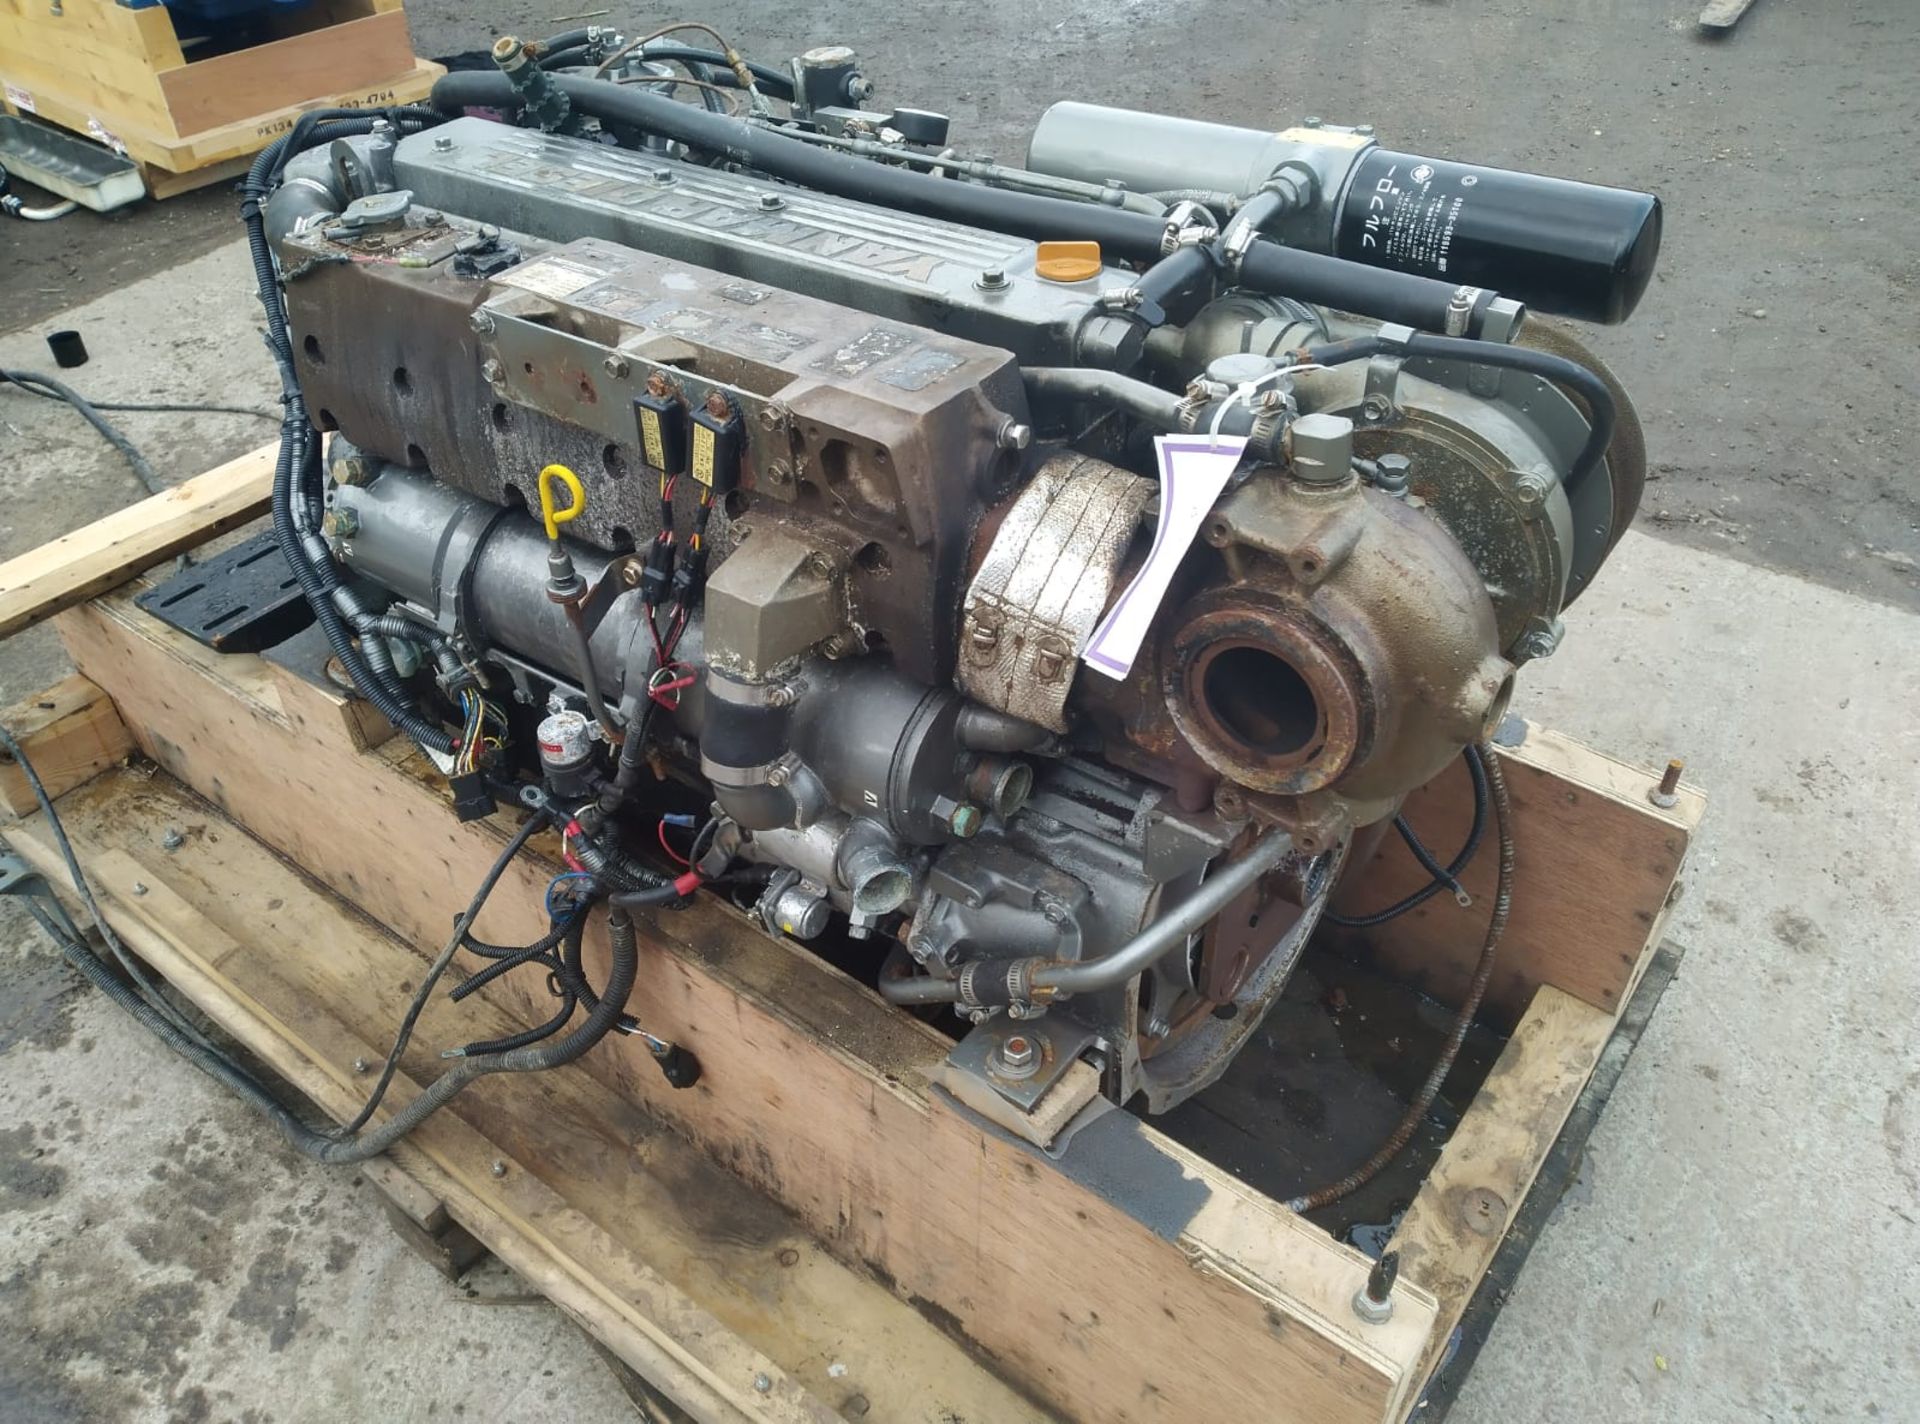 Yanmar RCD-6LY2X1 Diesel Boat Engine - 6LY2A-STP - 324kW (434HP) - Details in the description - Image 19 of 19